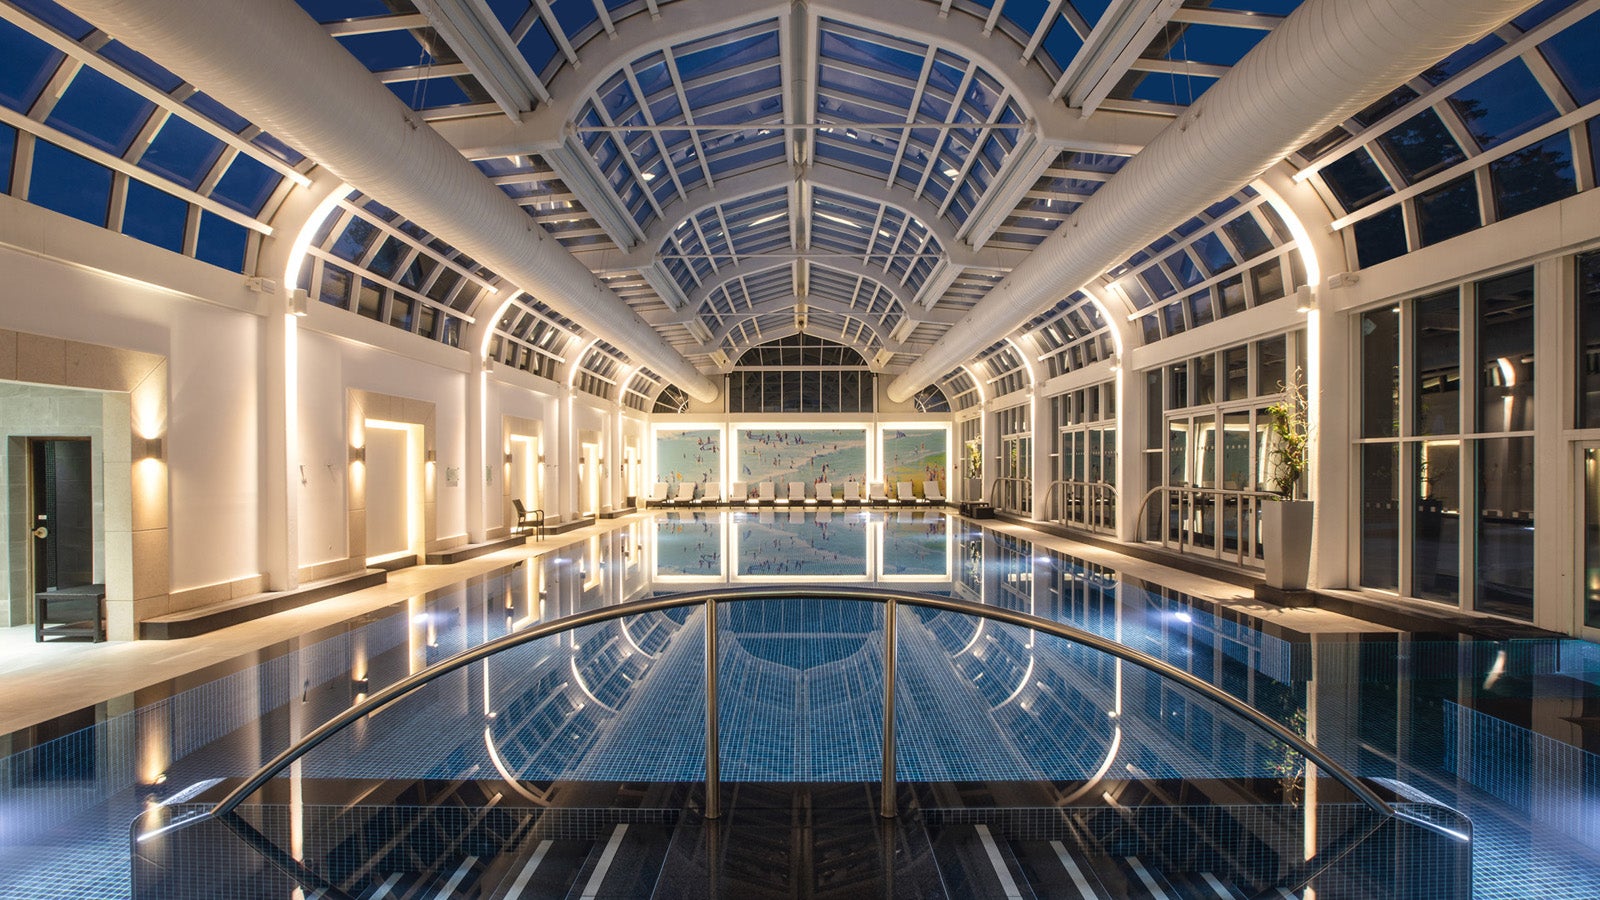 The pool fits in with the hotel’s sense of luxury